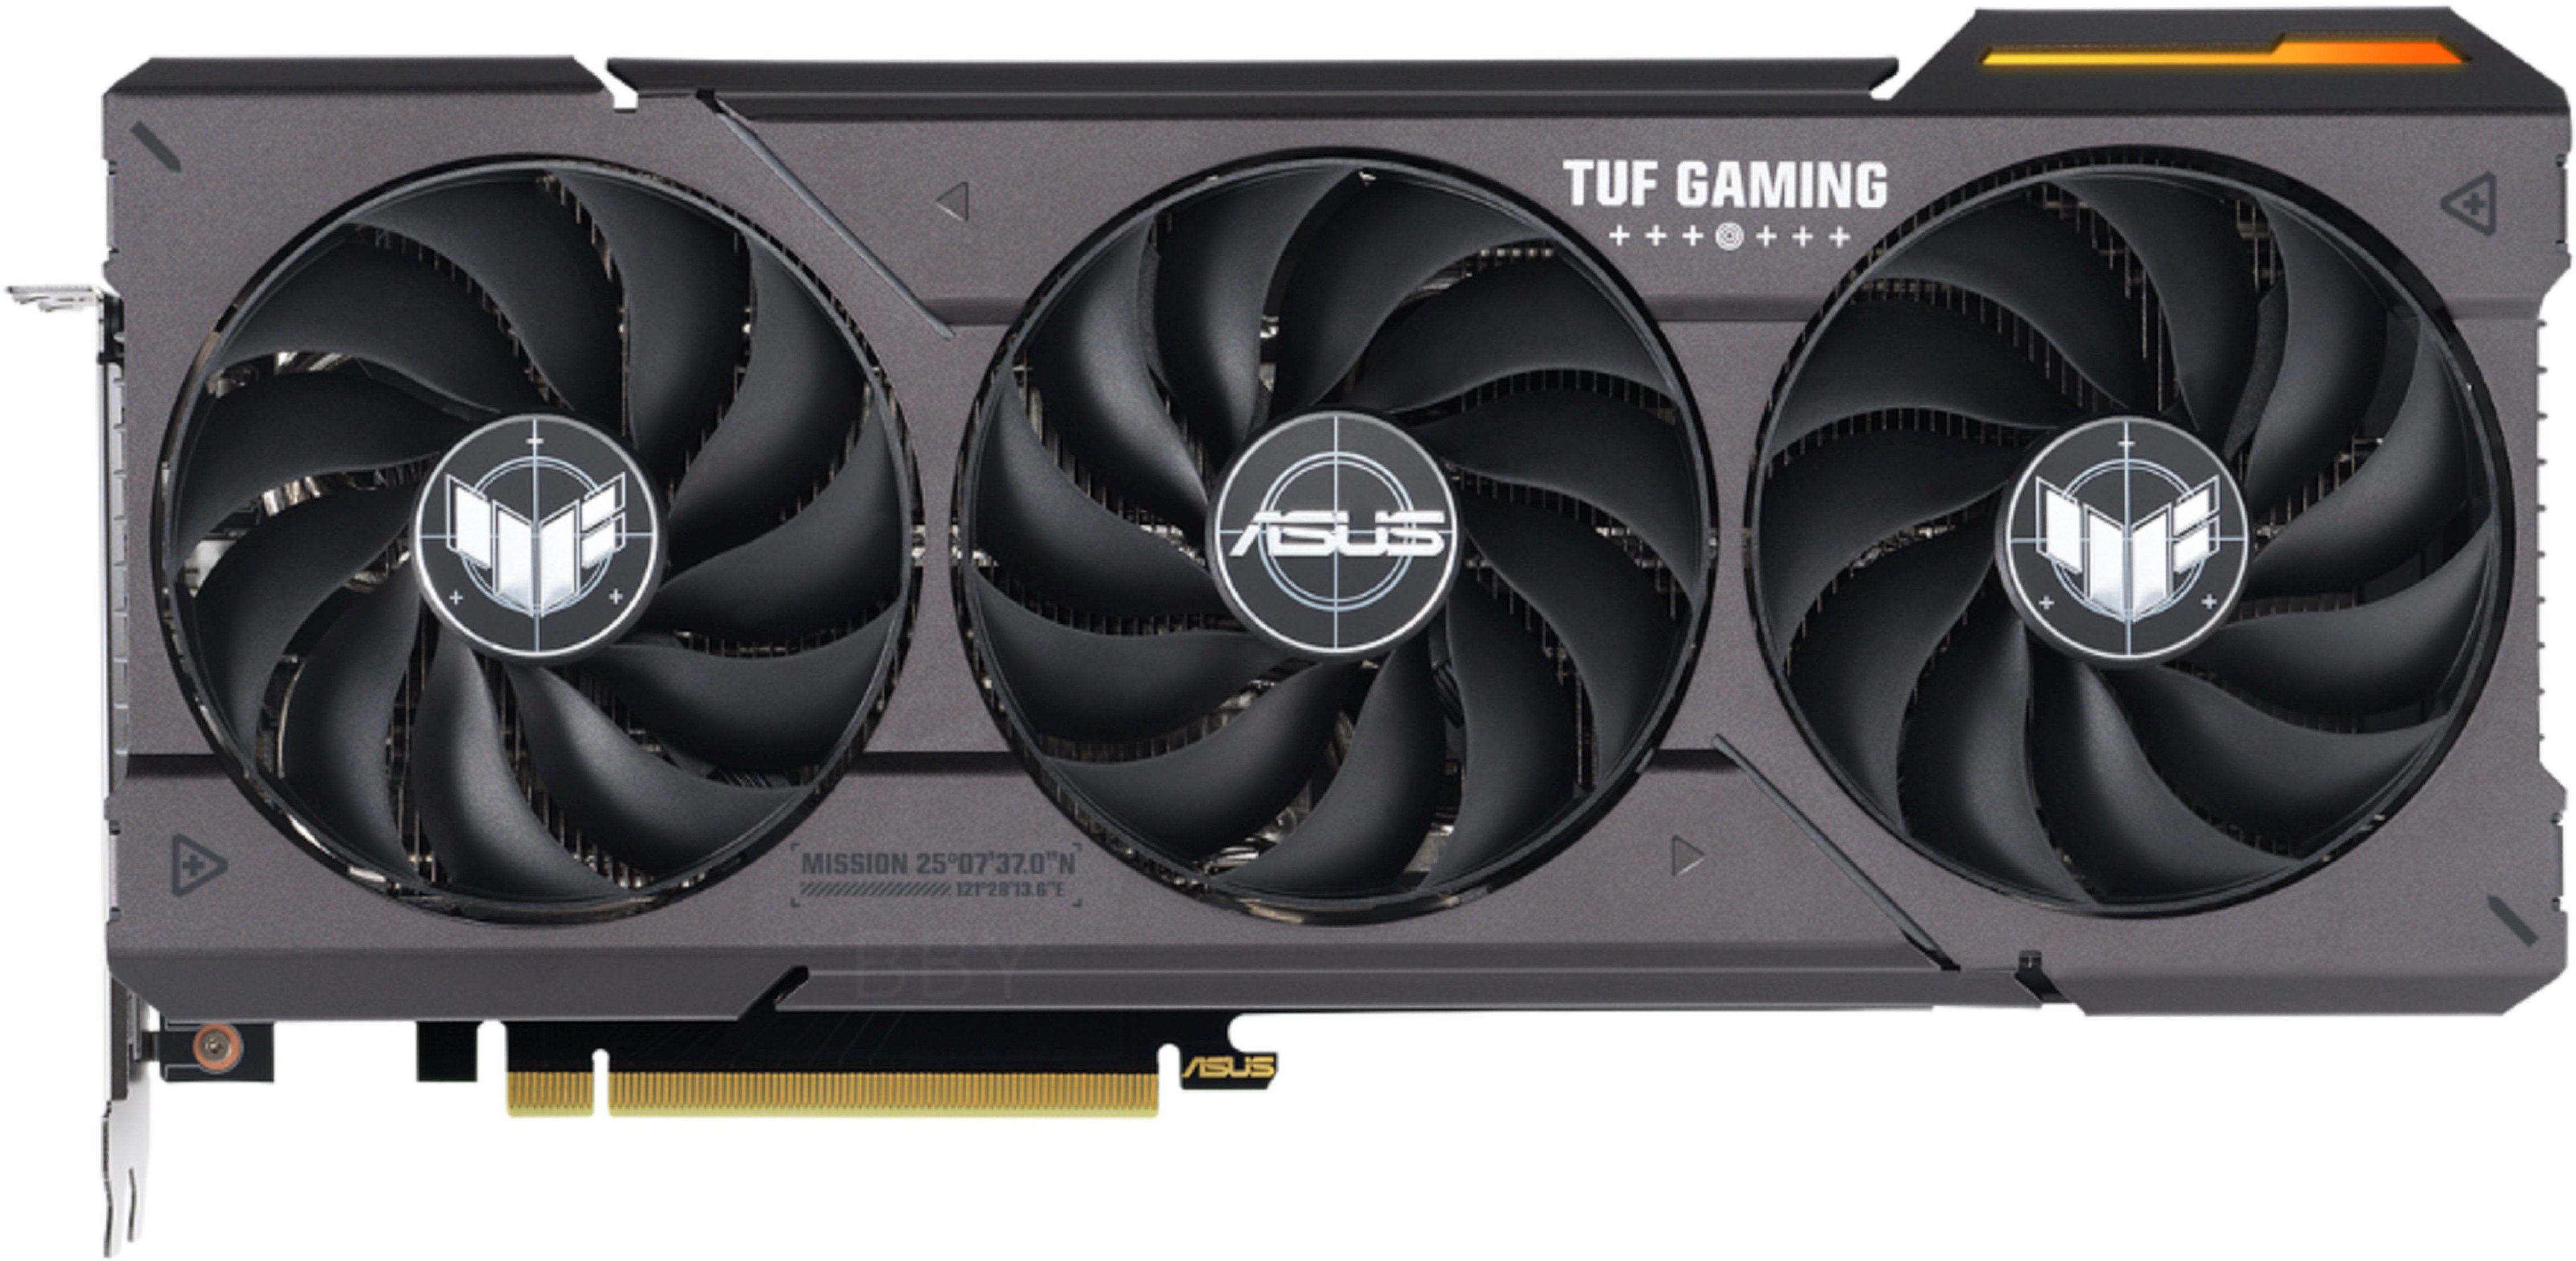 ASUS Announces Dual GeForce RTX 4060 Ti SSD Graphics Card